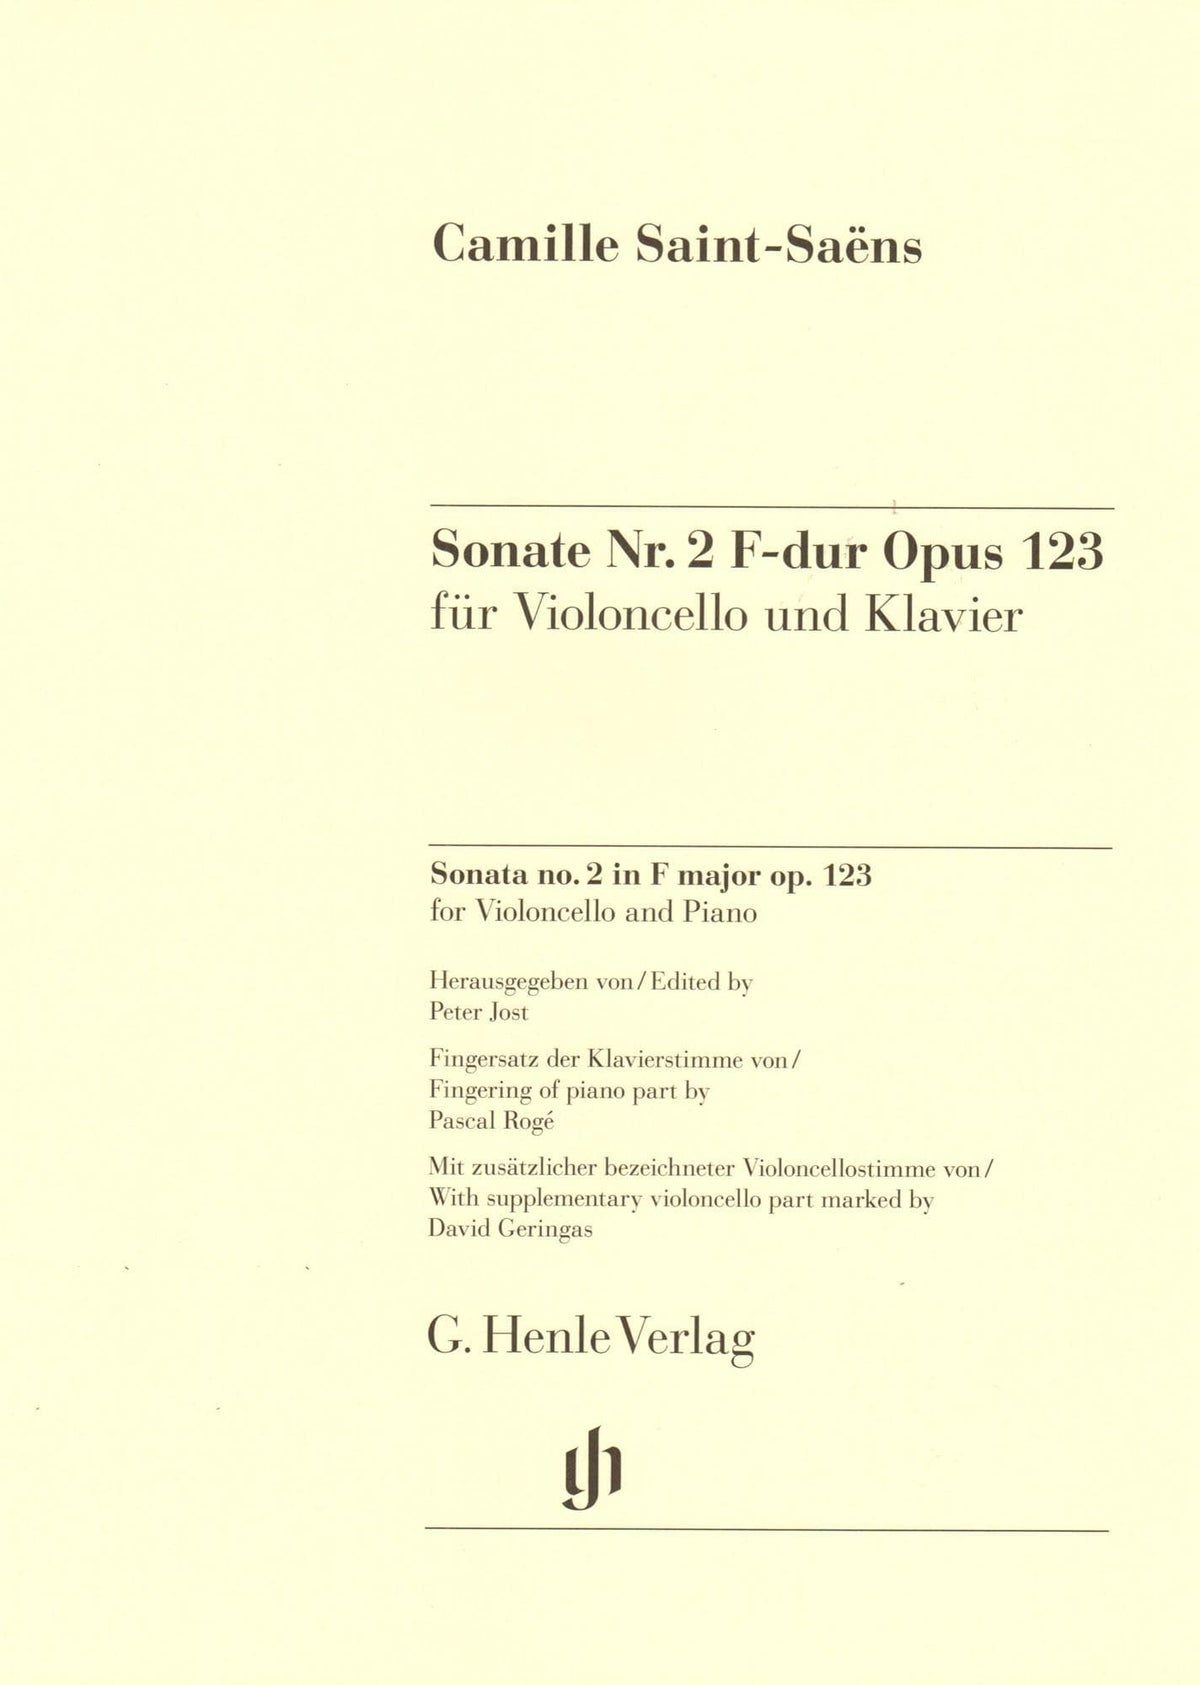 Saint-Saëns, Camille - Sonata No. 2 in F major, Opus 123 - for Cello and Piano - edited by Jost, Geringas, and Rogé - G. Henle Verlag URTEXT